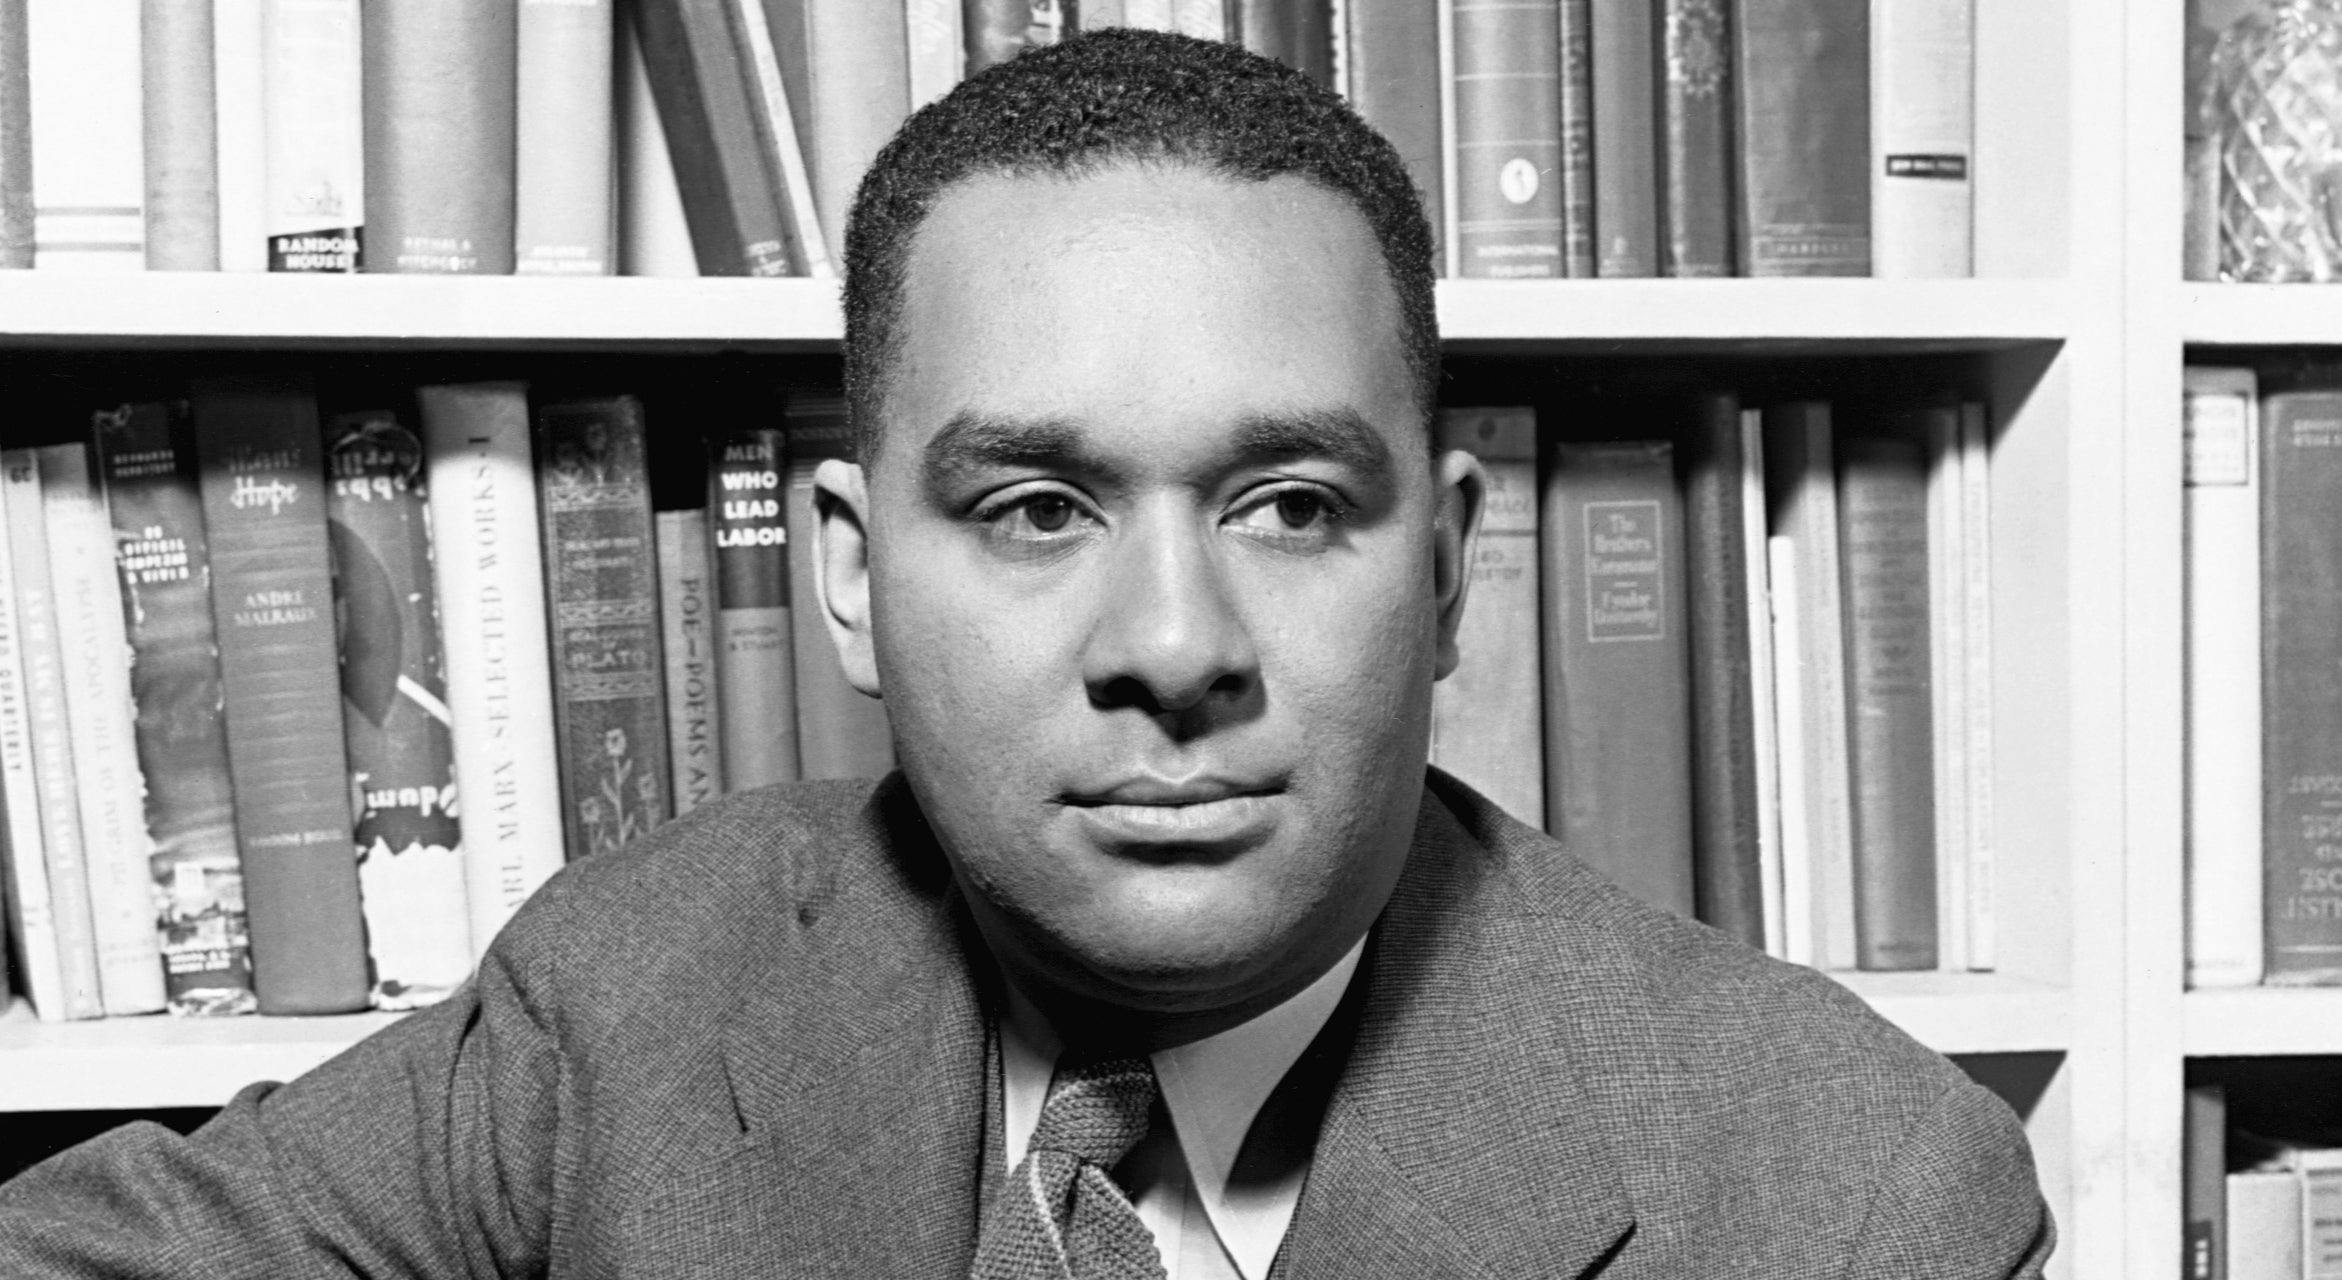 Portrait of Richard Wright in front of a shelf of books